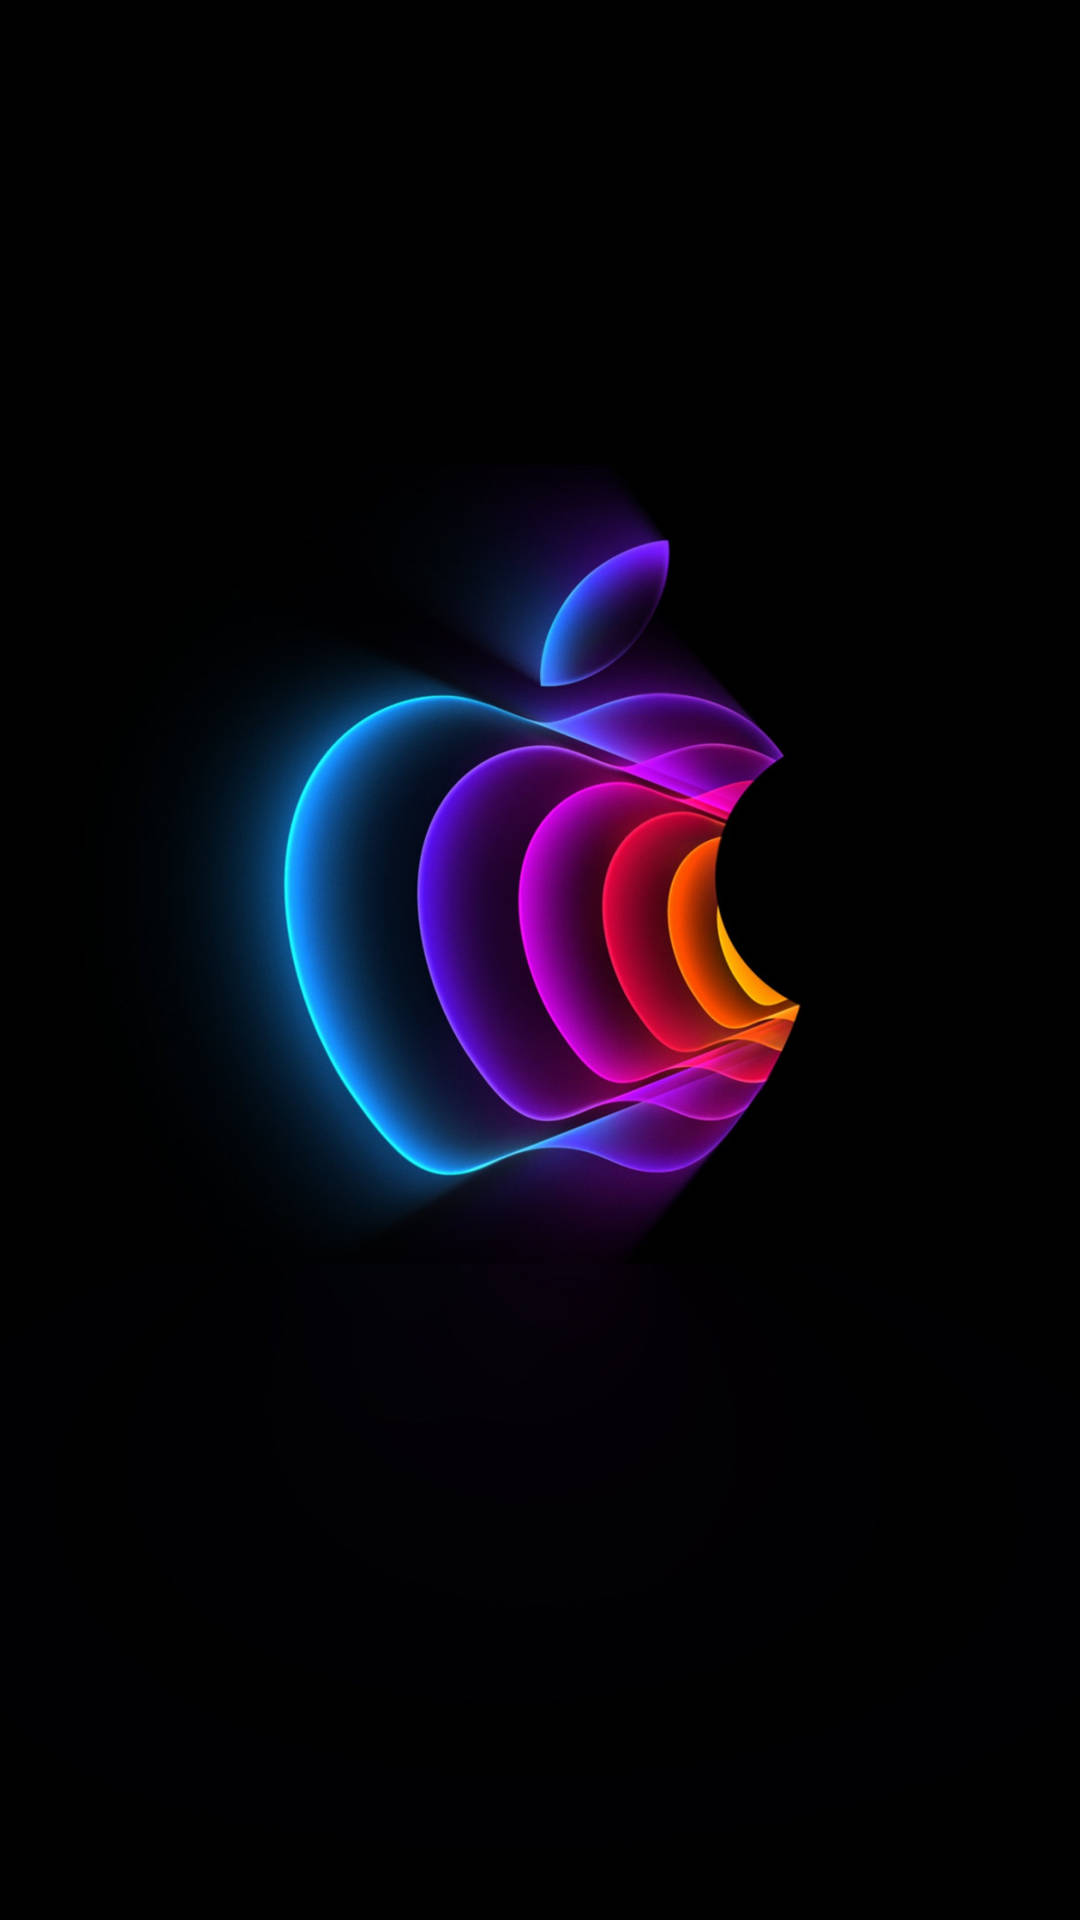 Vibrant Apple Logo Embraced by Solid Black Background Wallpaper